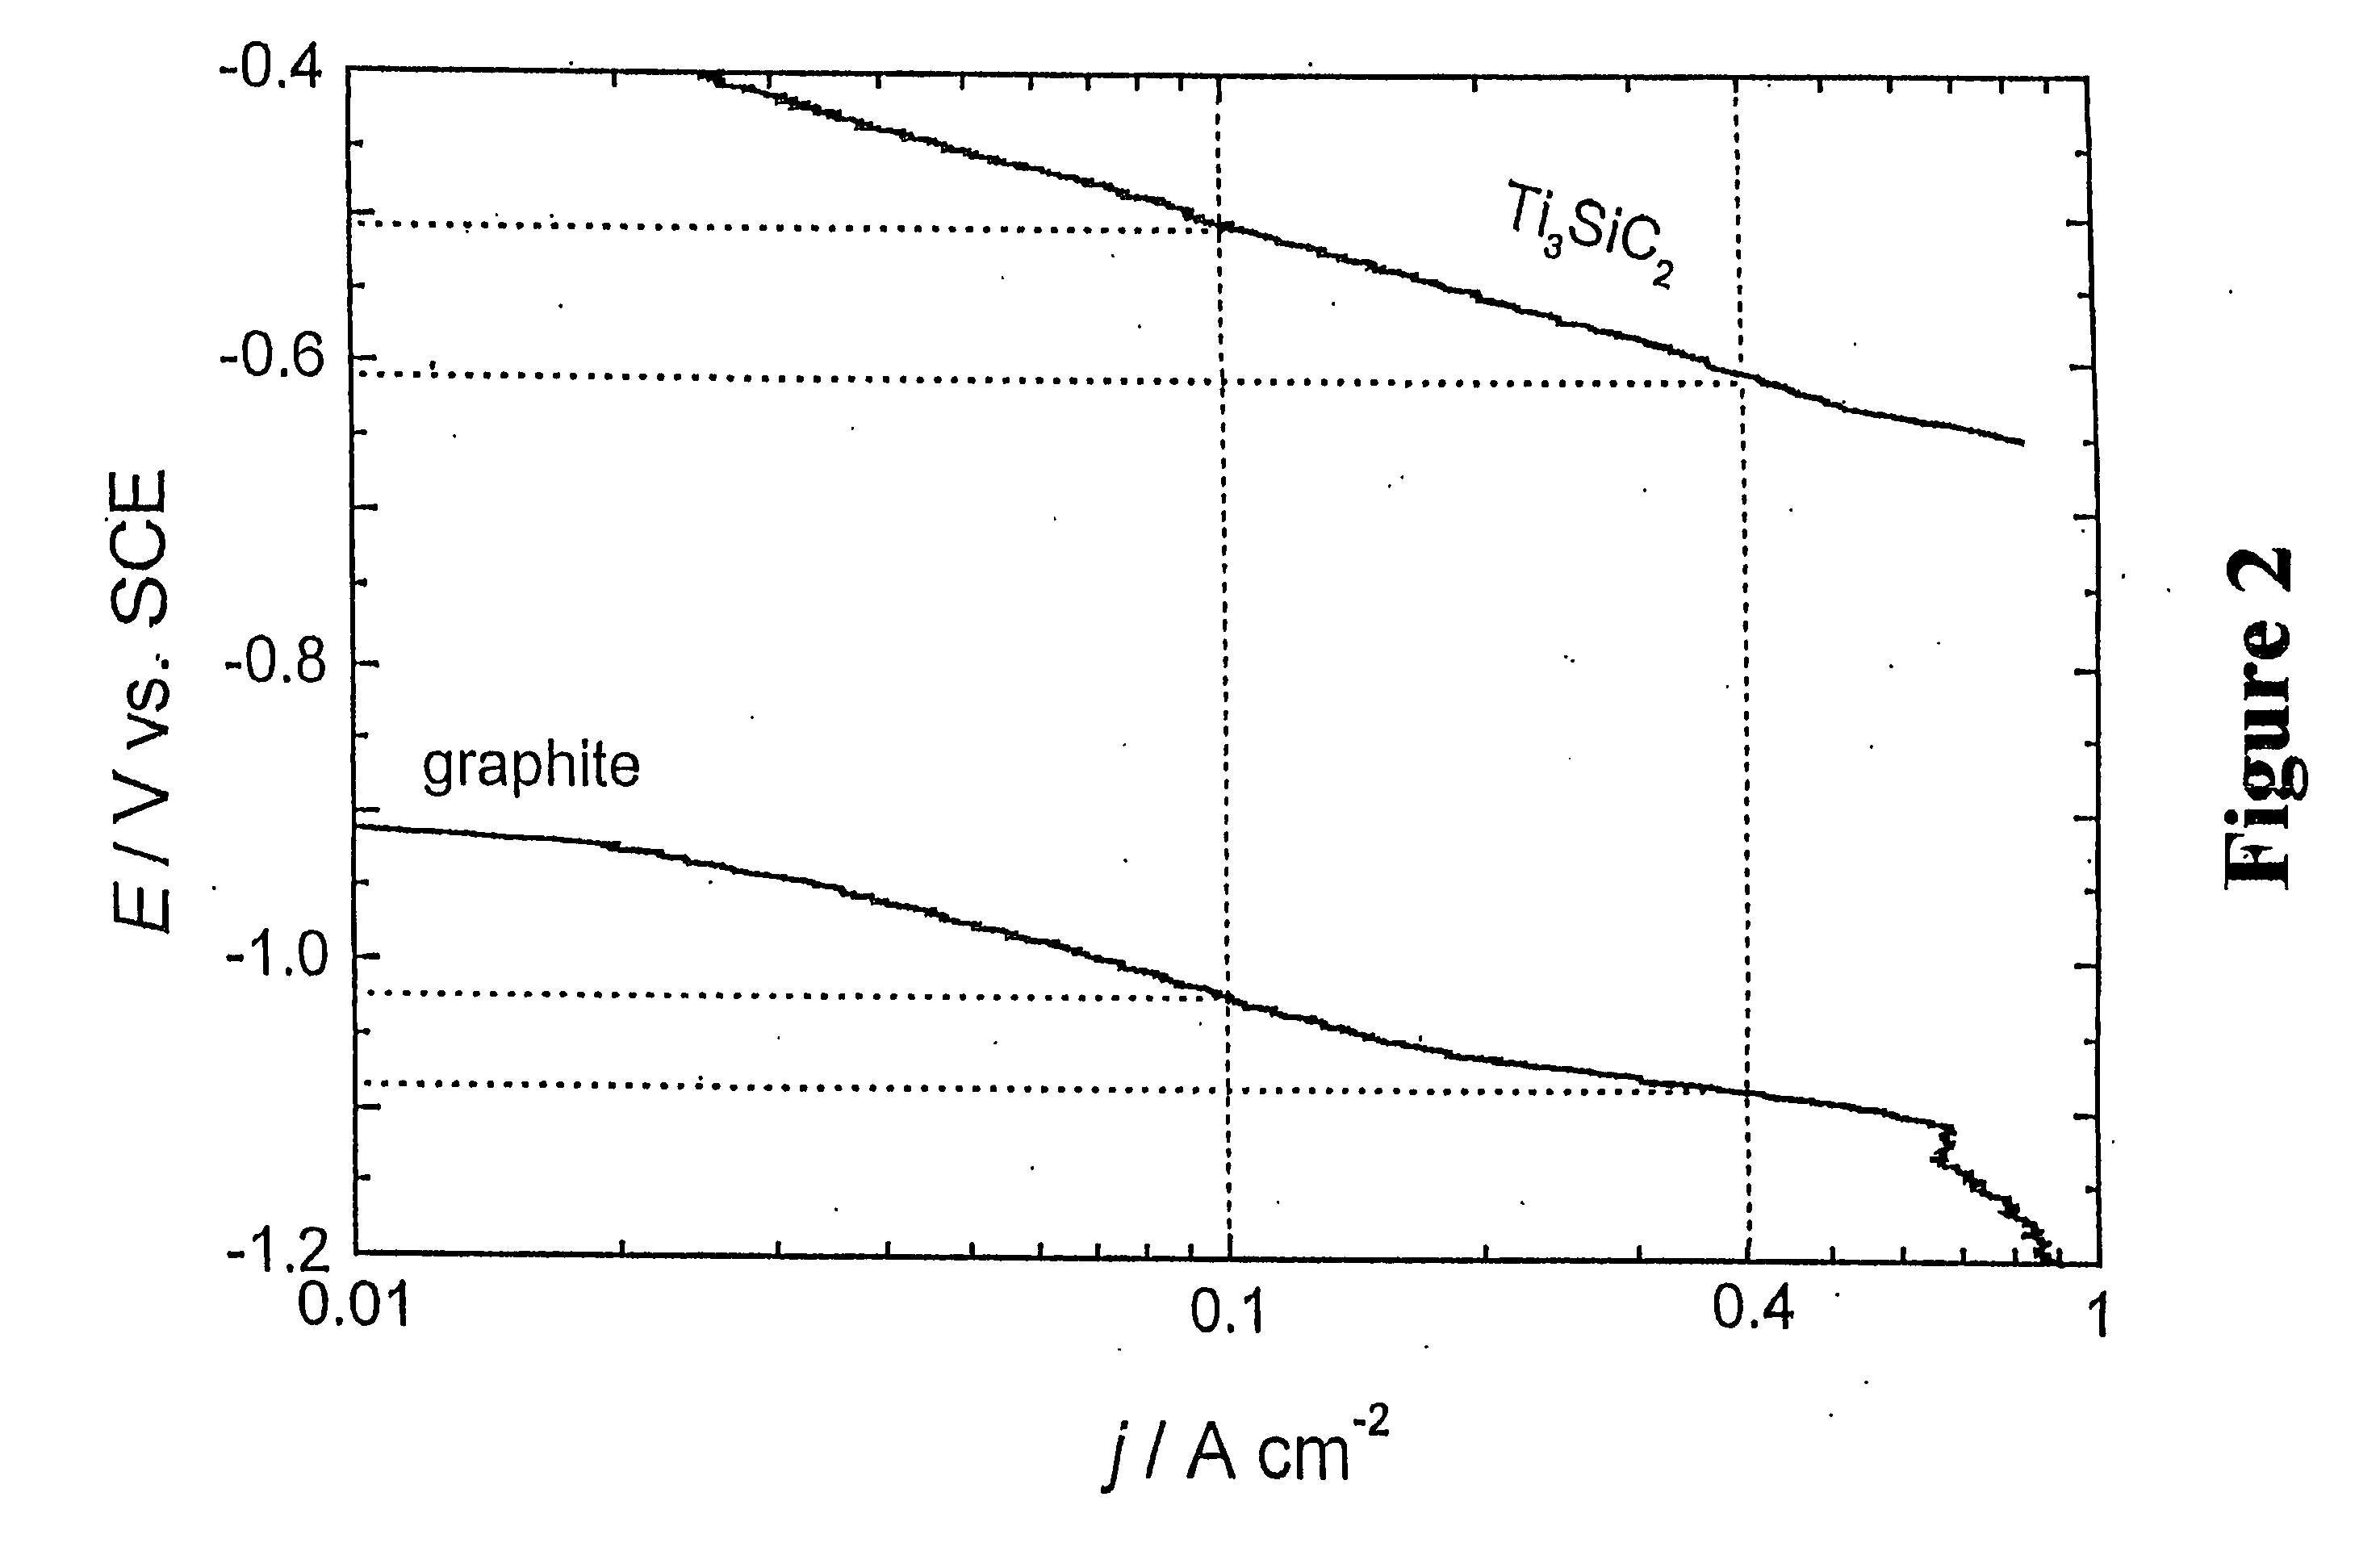 Electrolytic cell and electrodes for use in electrochemical processes